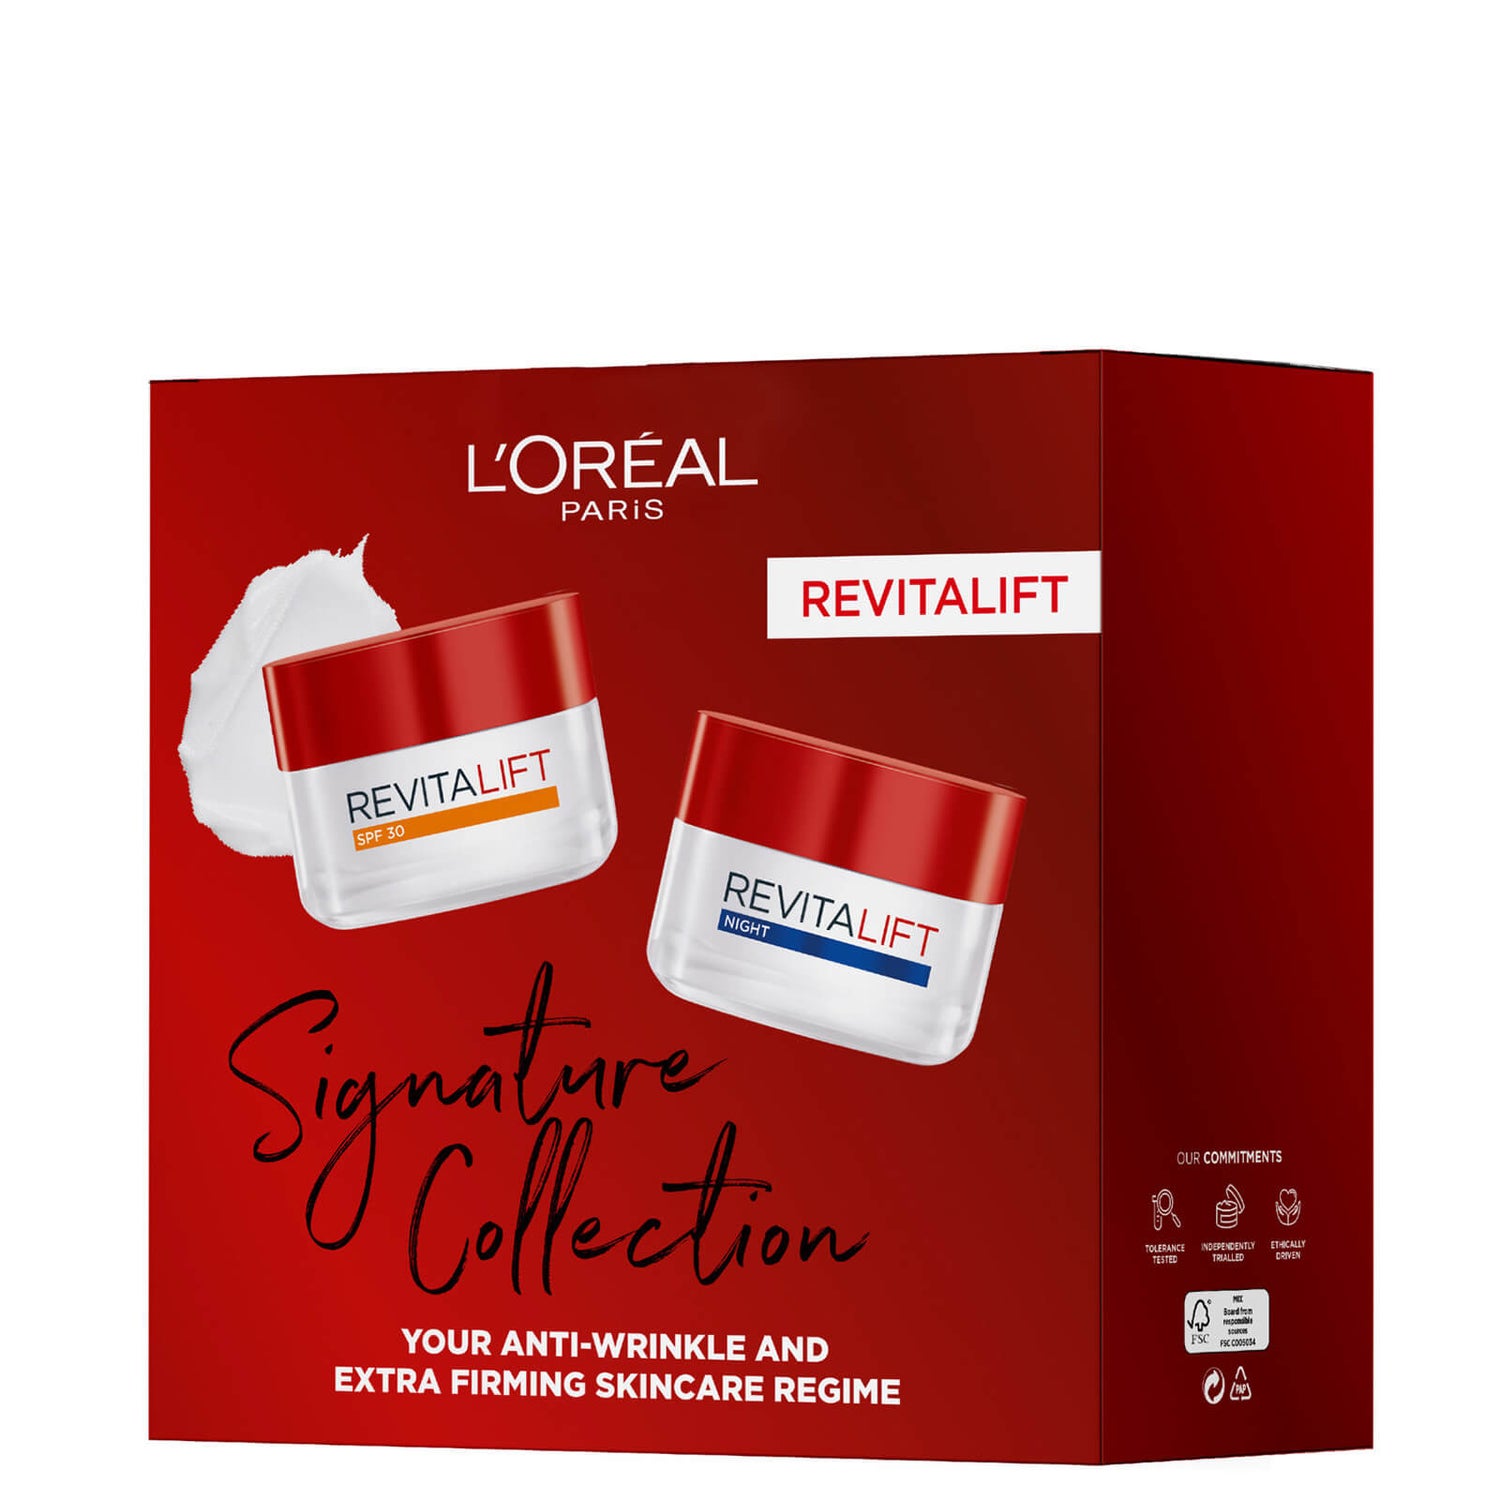 L'Oreal Paris Revitalift SPF Day & Night Cream Signature Collection Gift Set for Her (Worth £25.98)